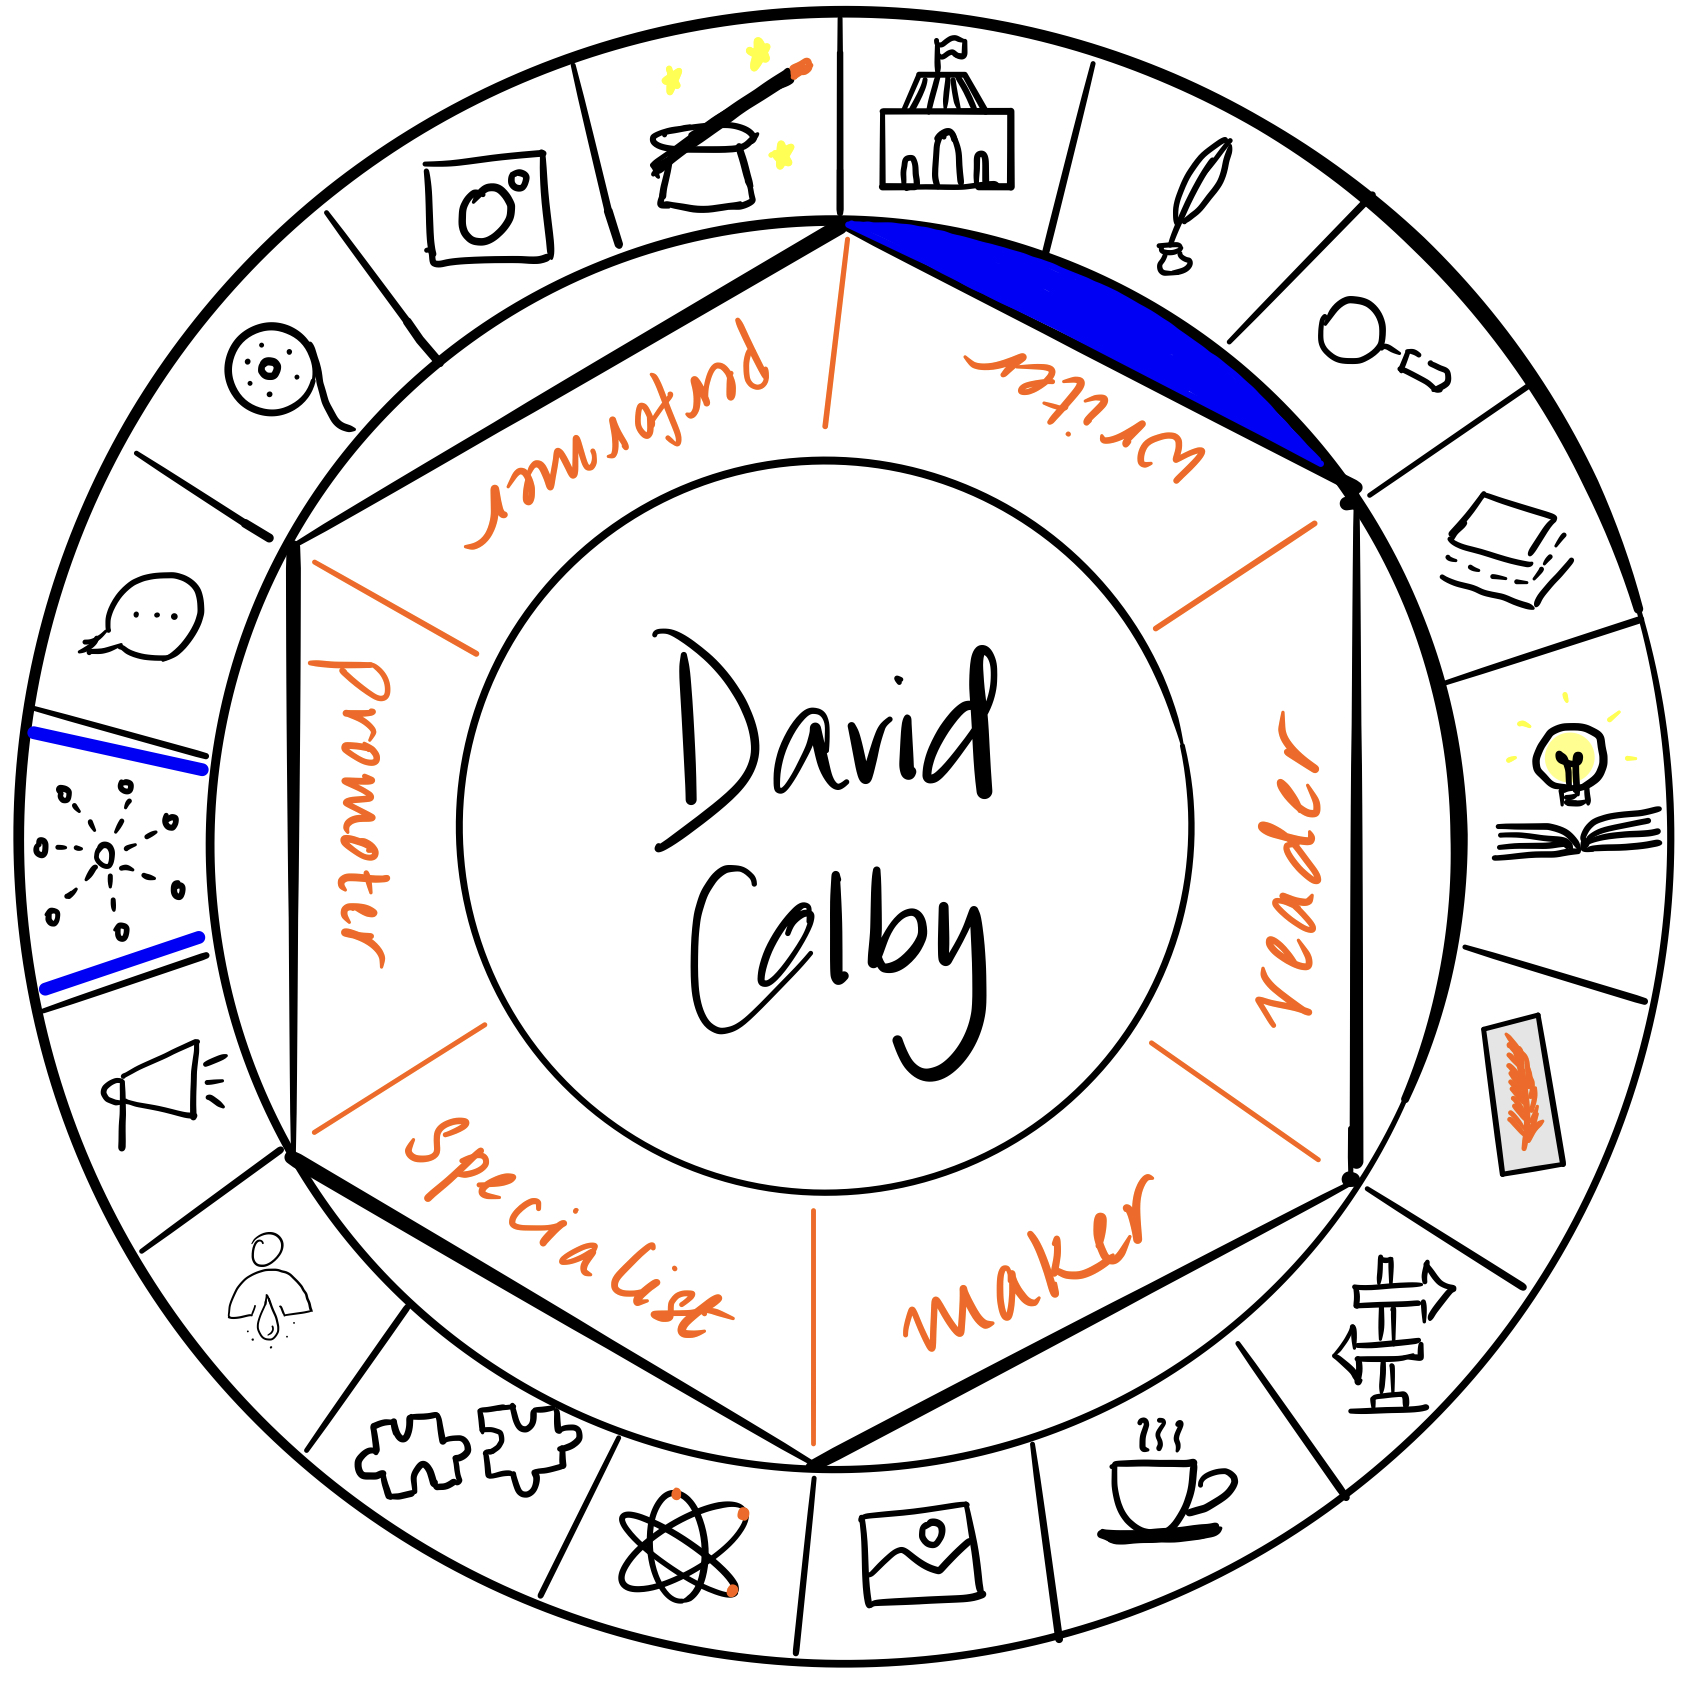 David Colby is a writer. It's a pleasure to have him over on The Creator's Roulette to talk about worldbuilding in science fiction.